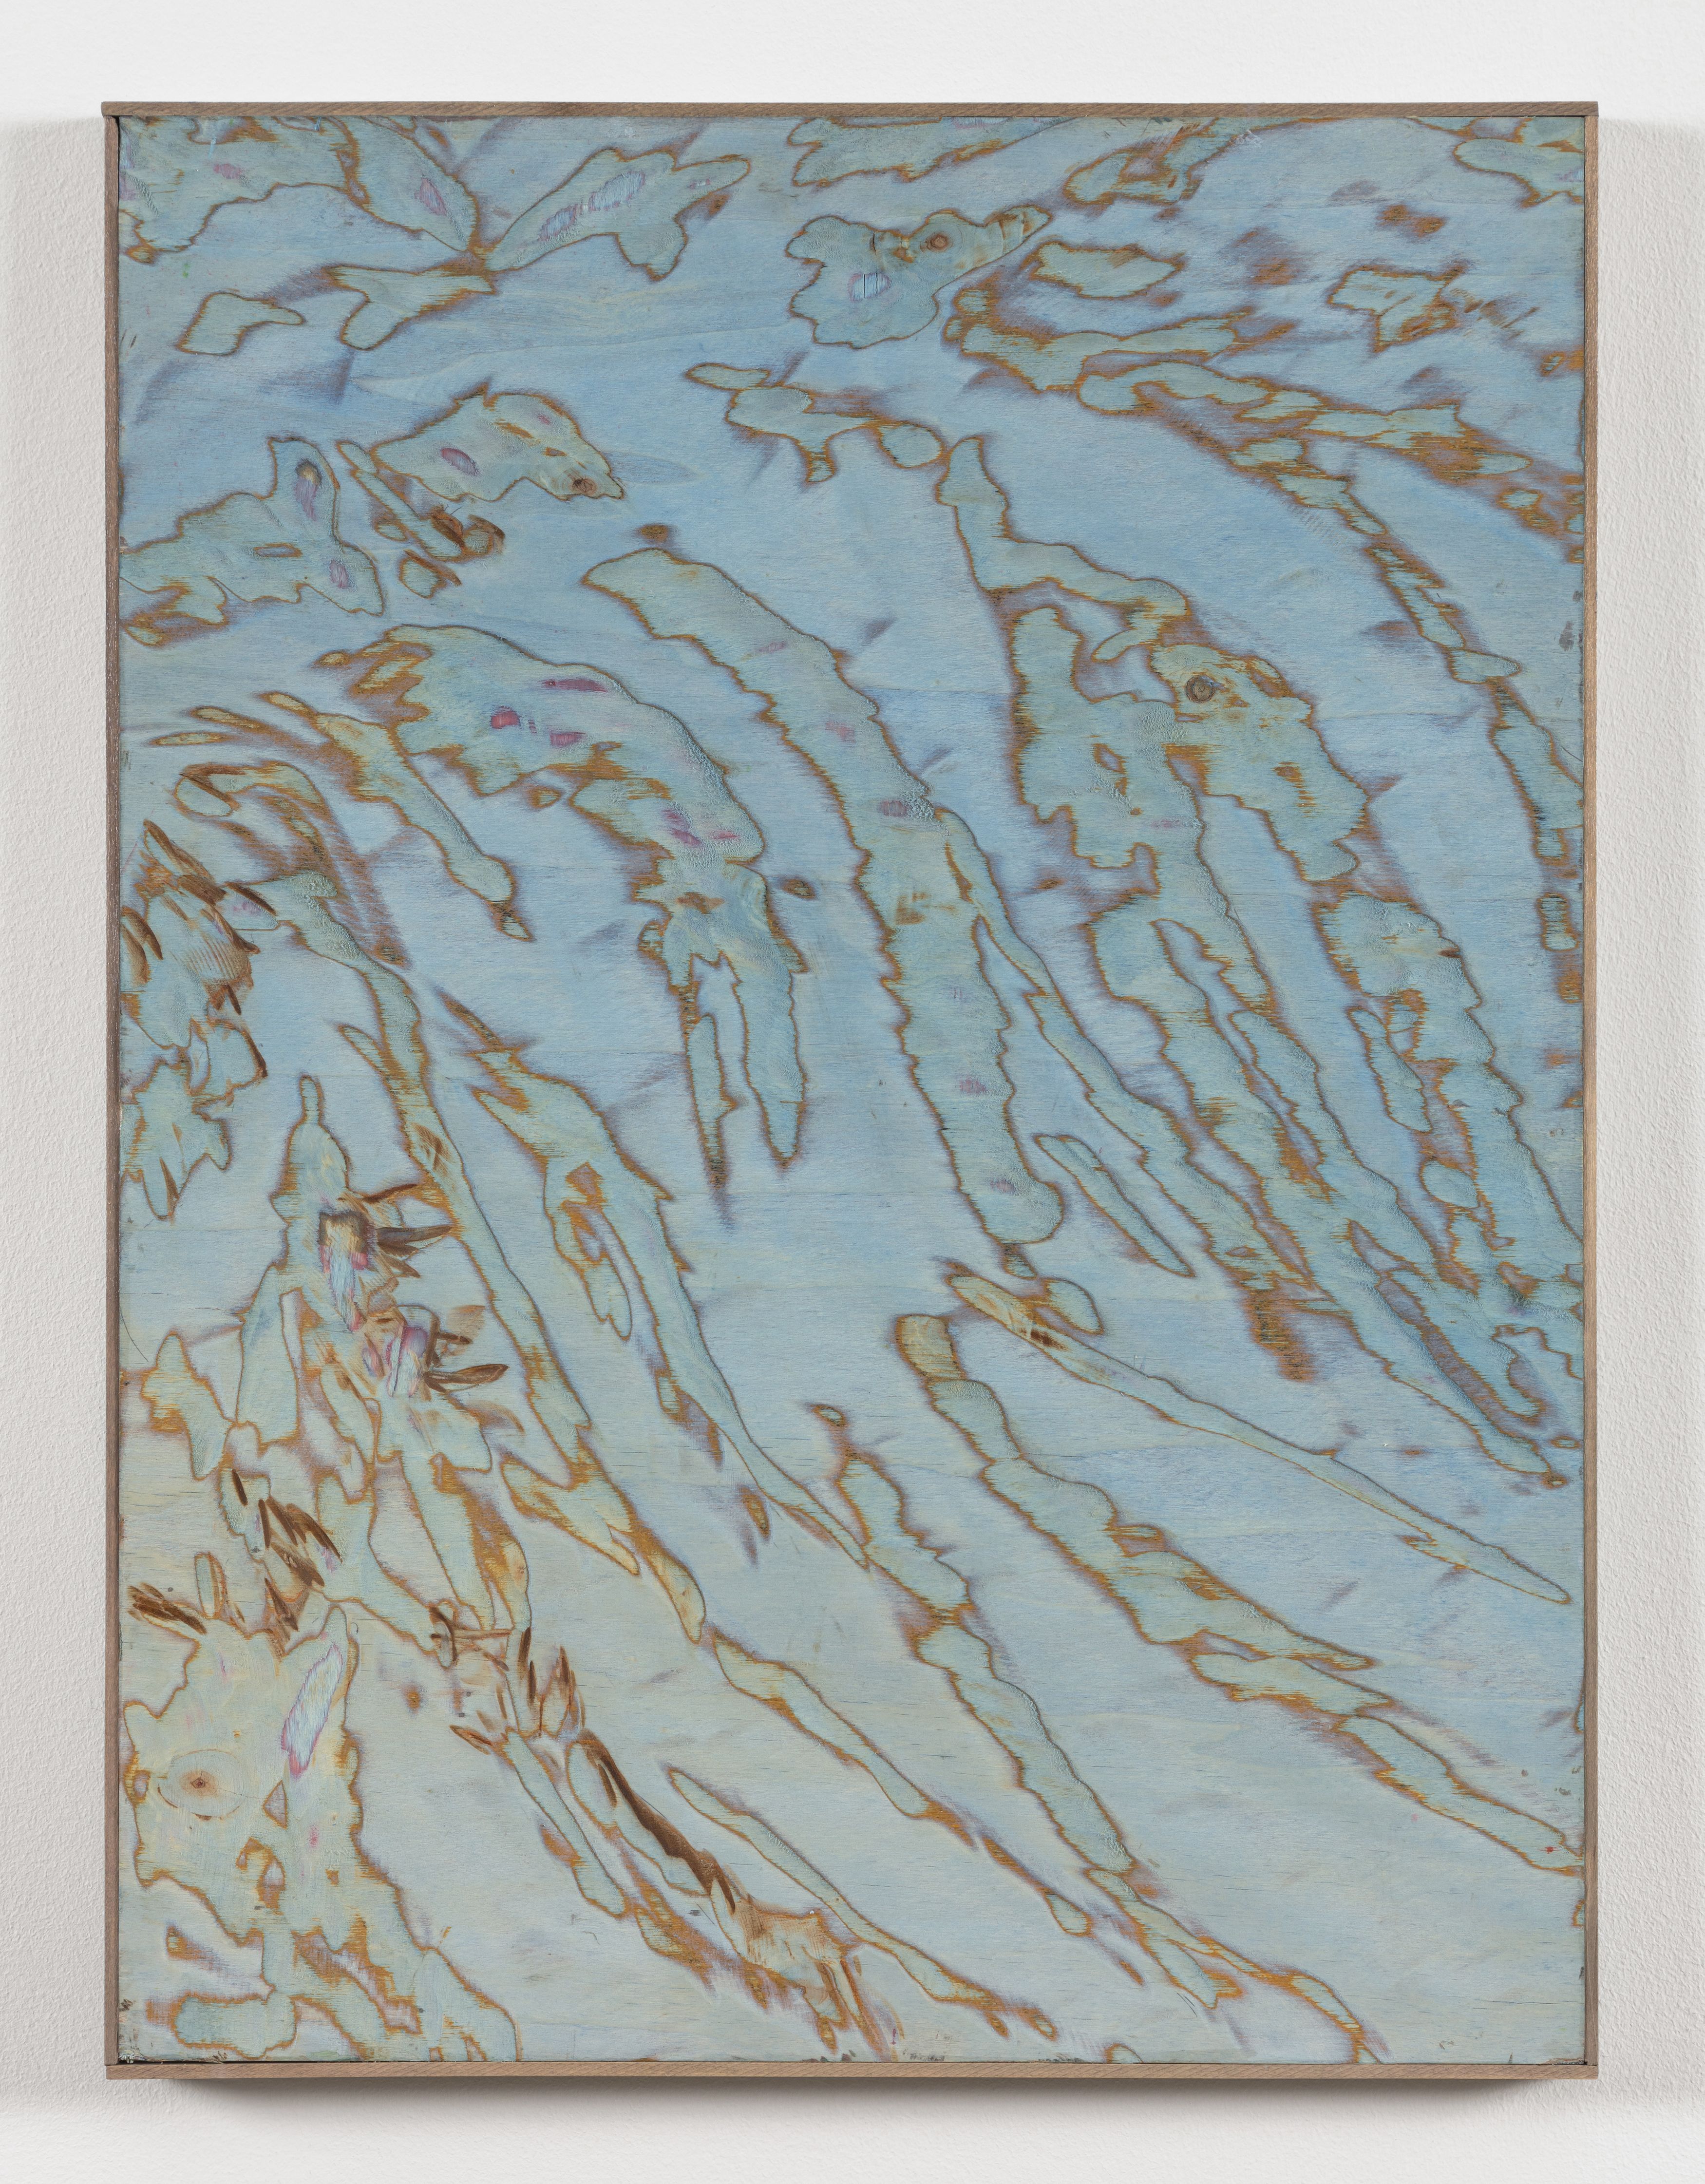 Gabriel Hartley, Above, 2019, acrylic on carved wood, 24 1⁄8 x 18 1⁄8 in. (61 x 46 cm)